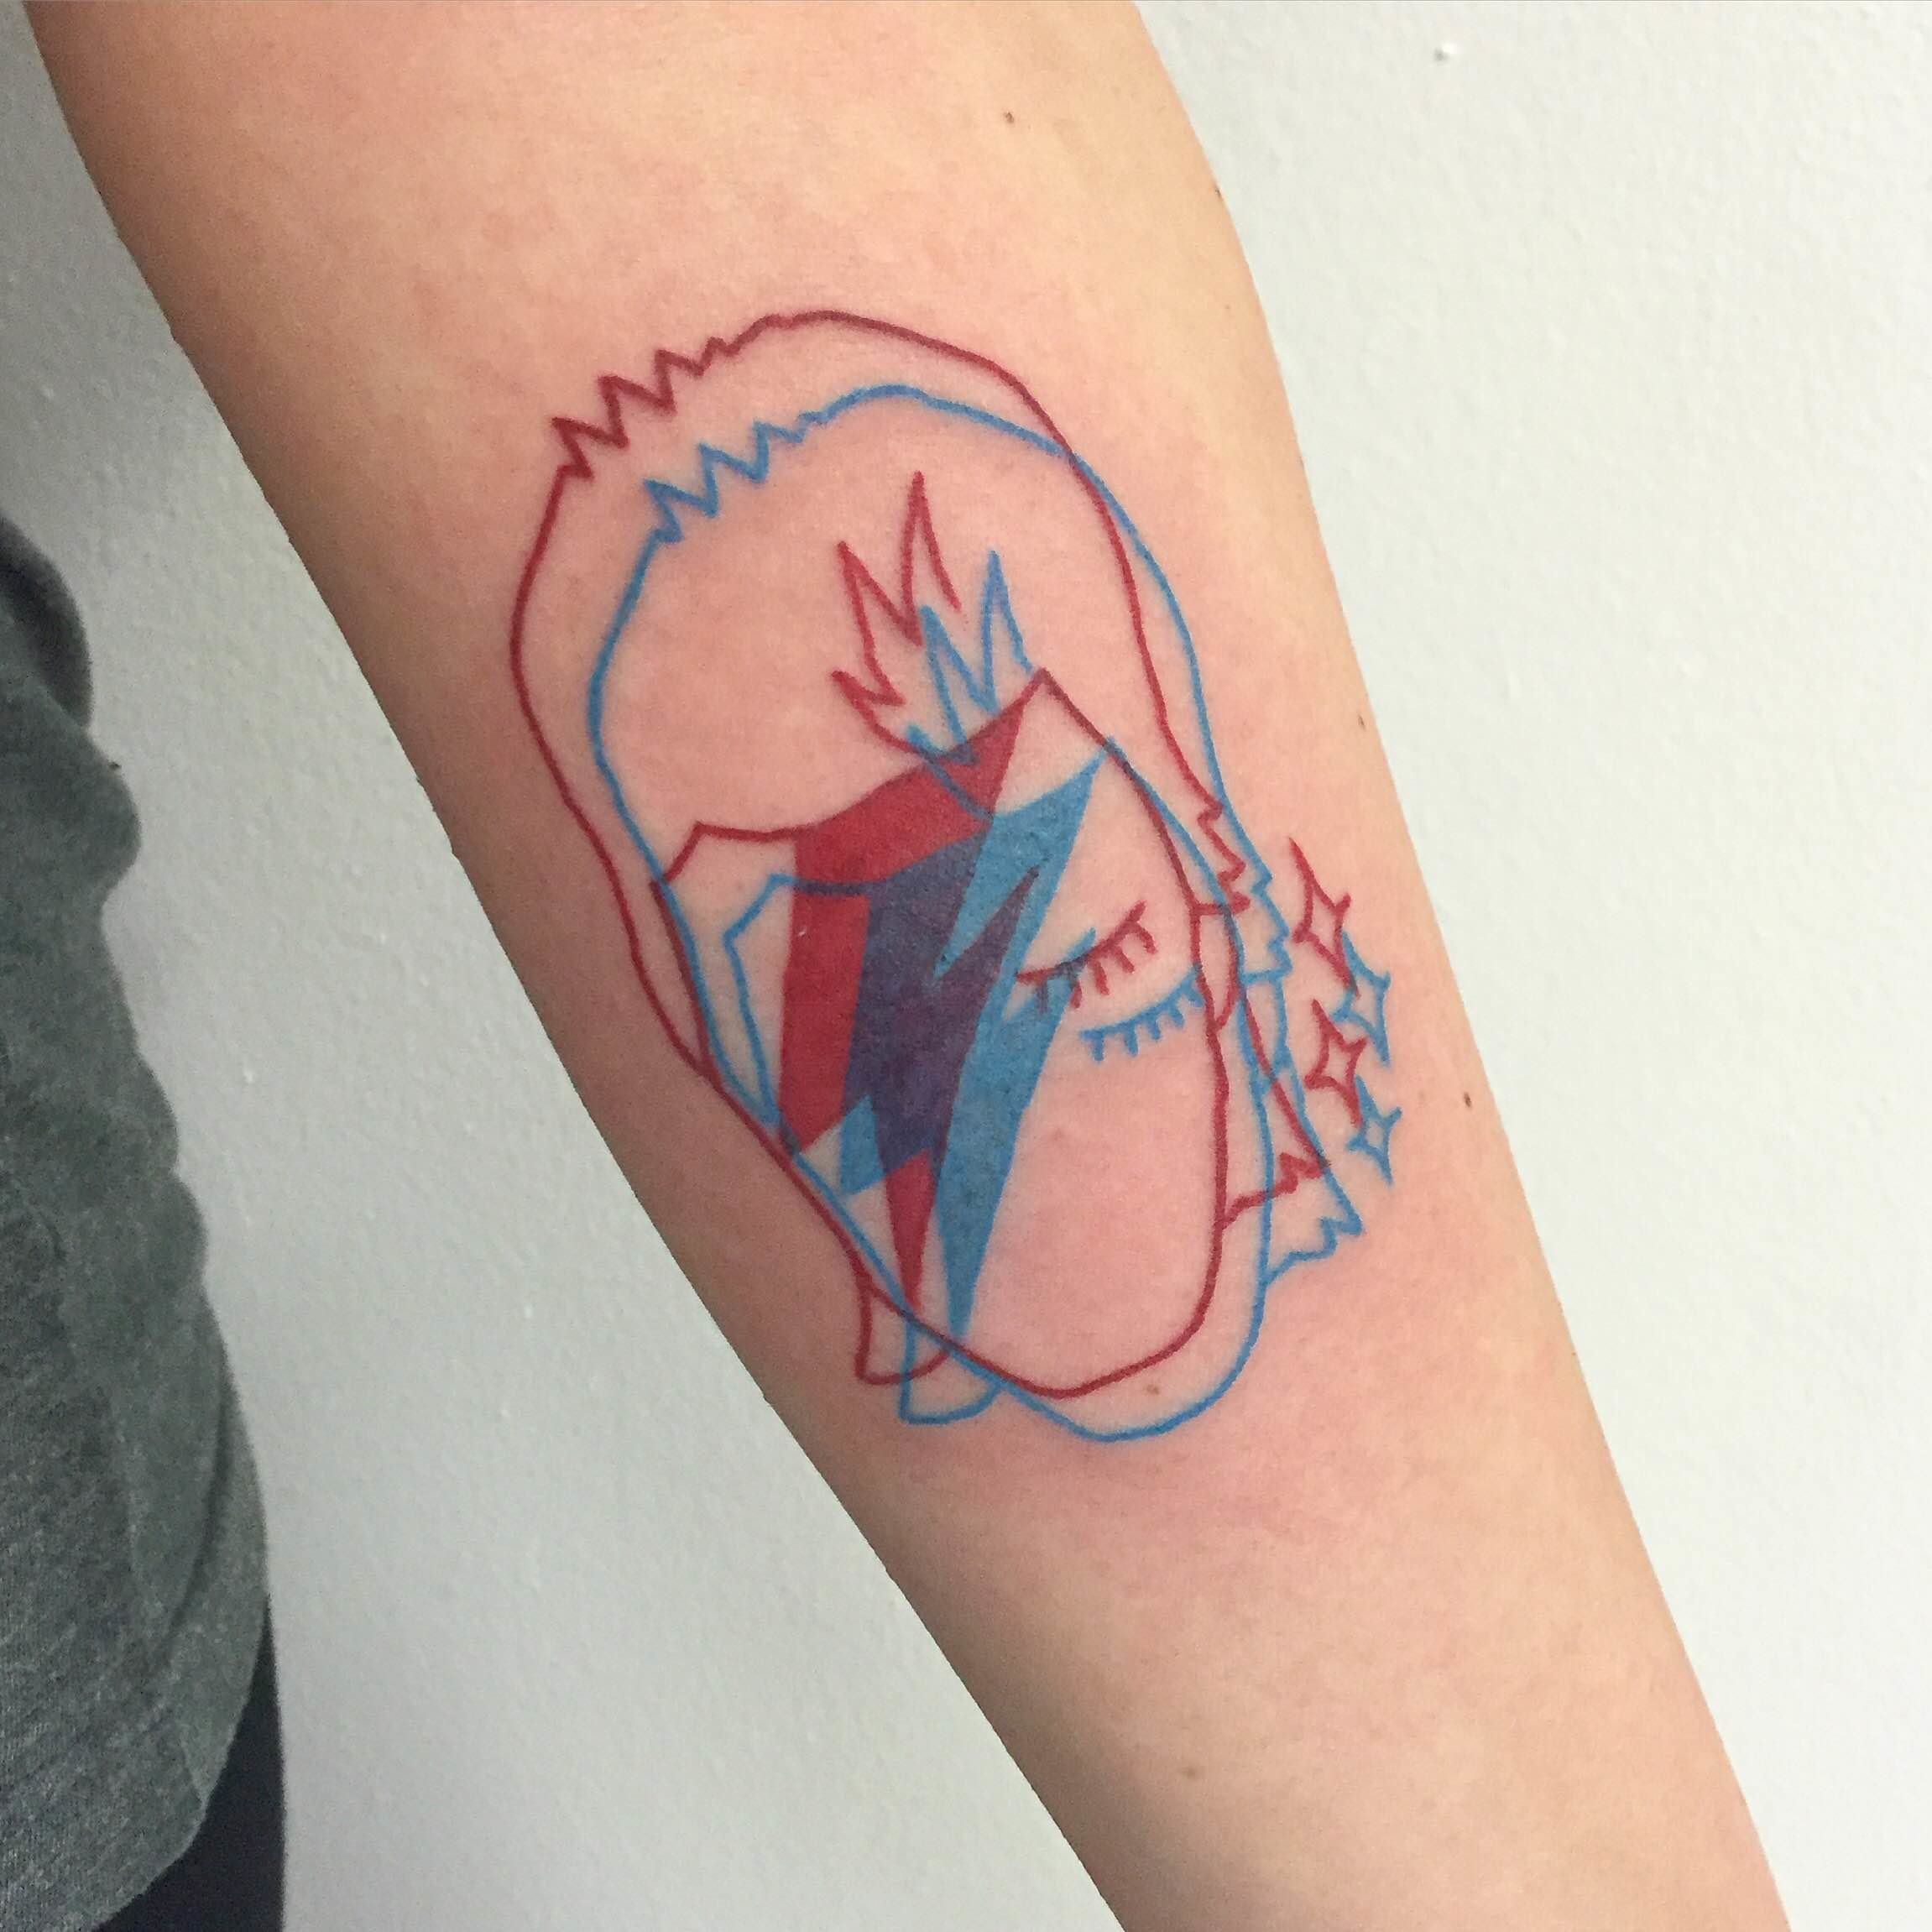 14 Geeky Tattoos That Are Actually Super Awesome